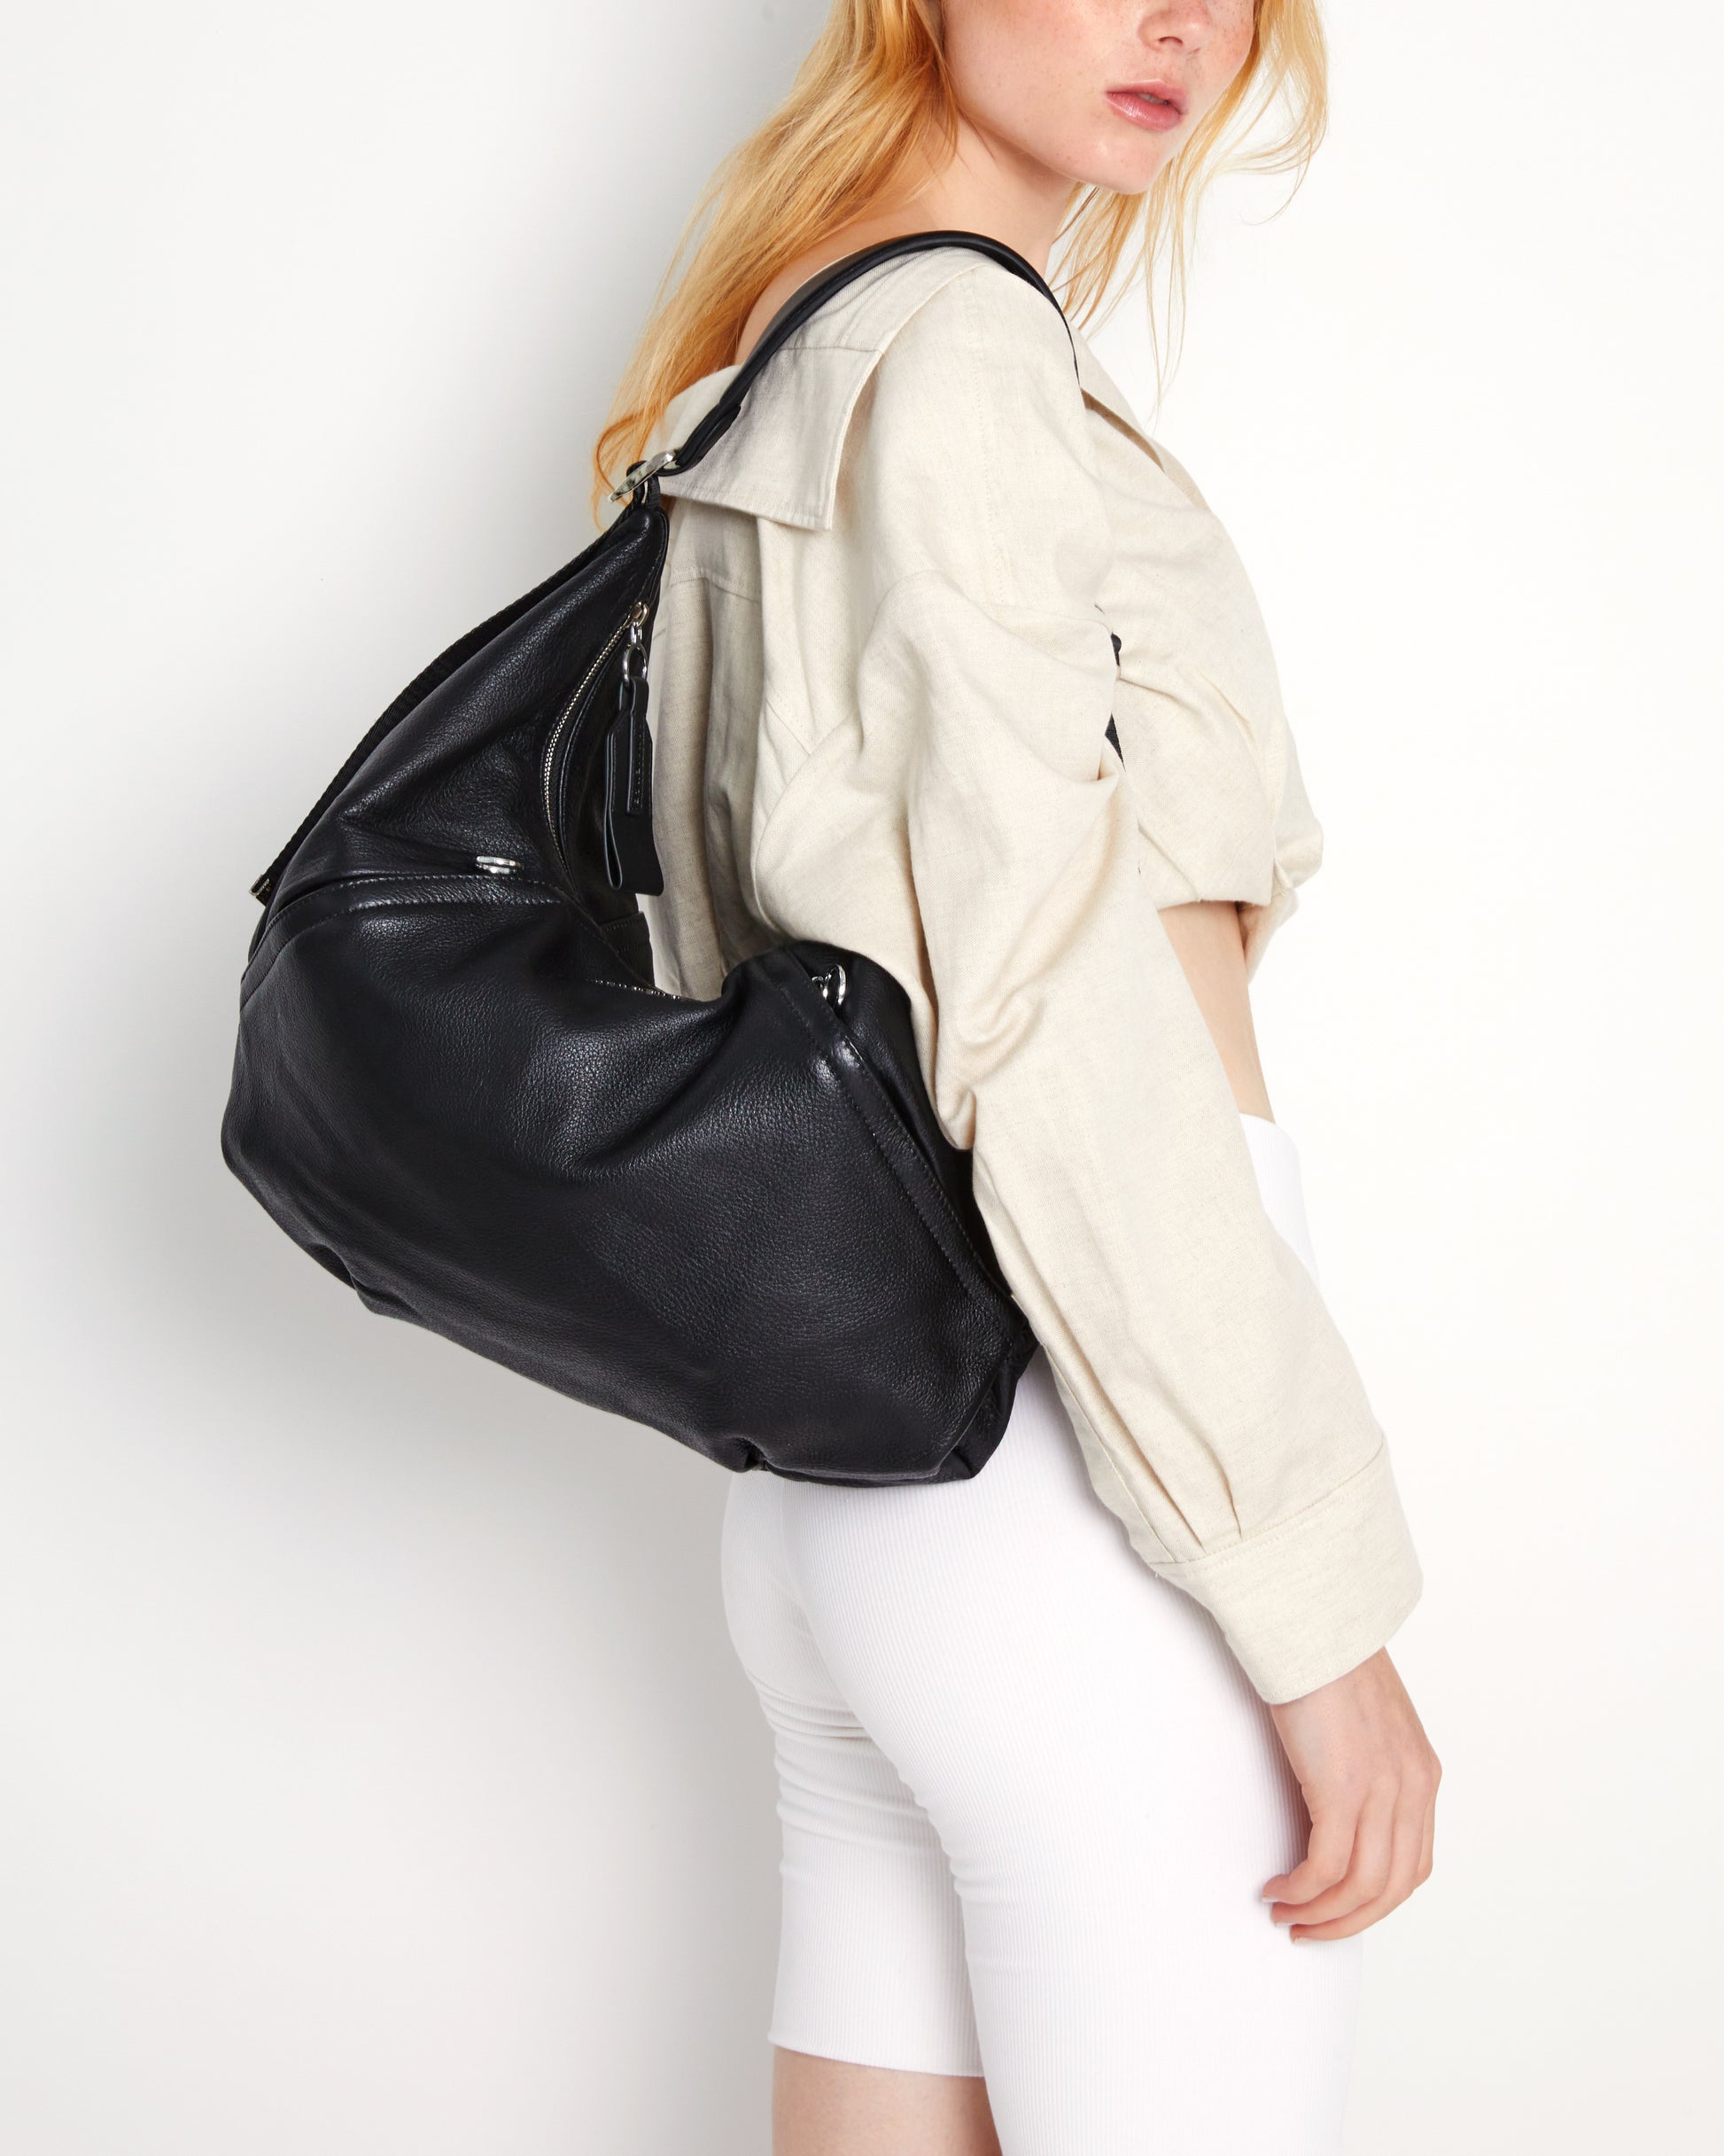 Black Leather Bag Soft Leather Bag Slouchy Leather Bag 